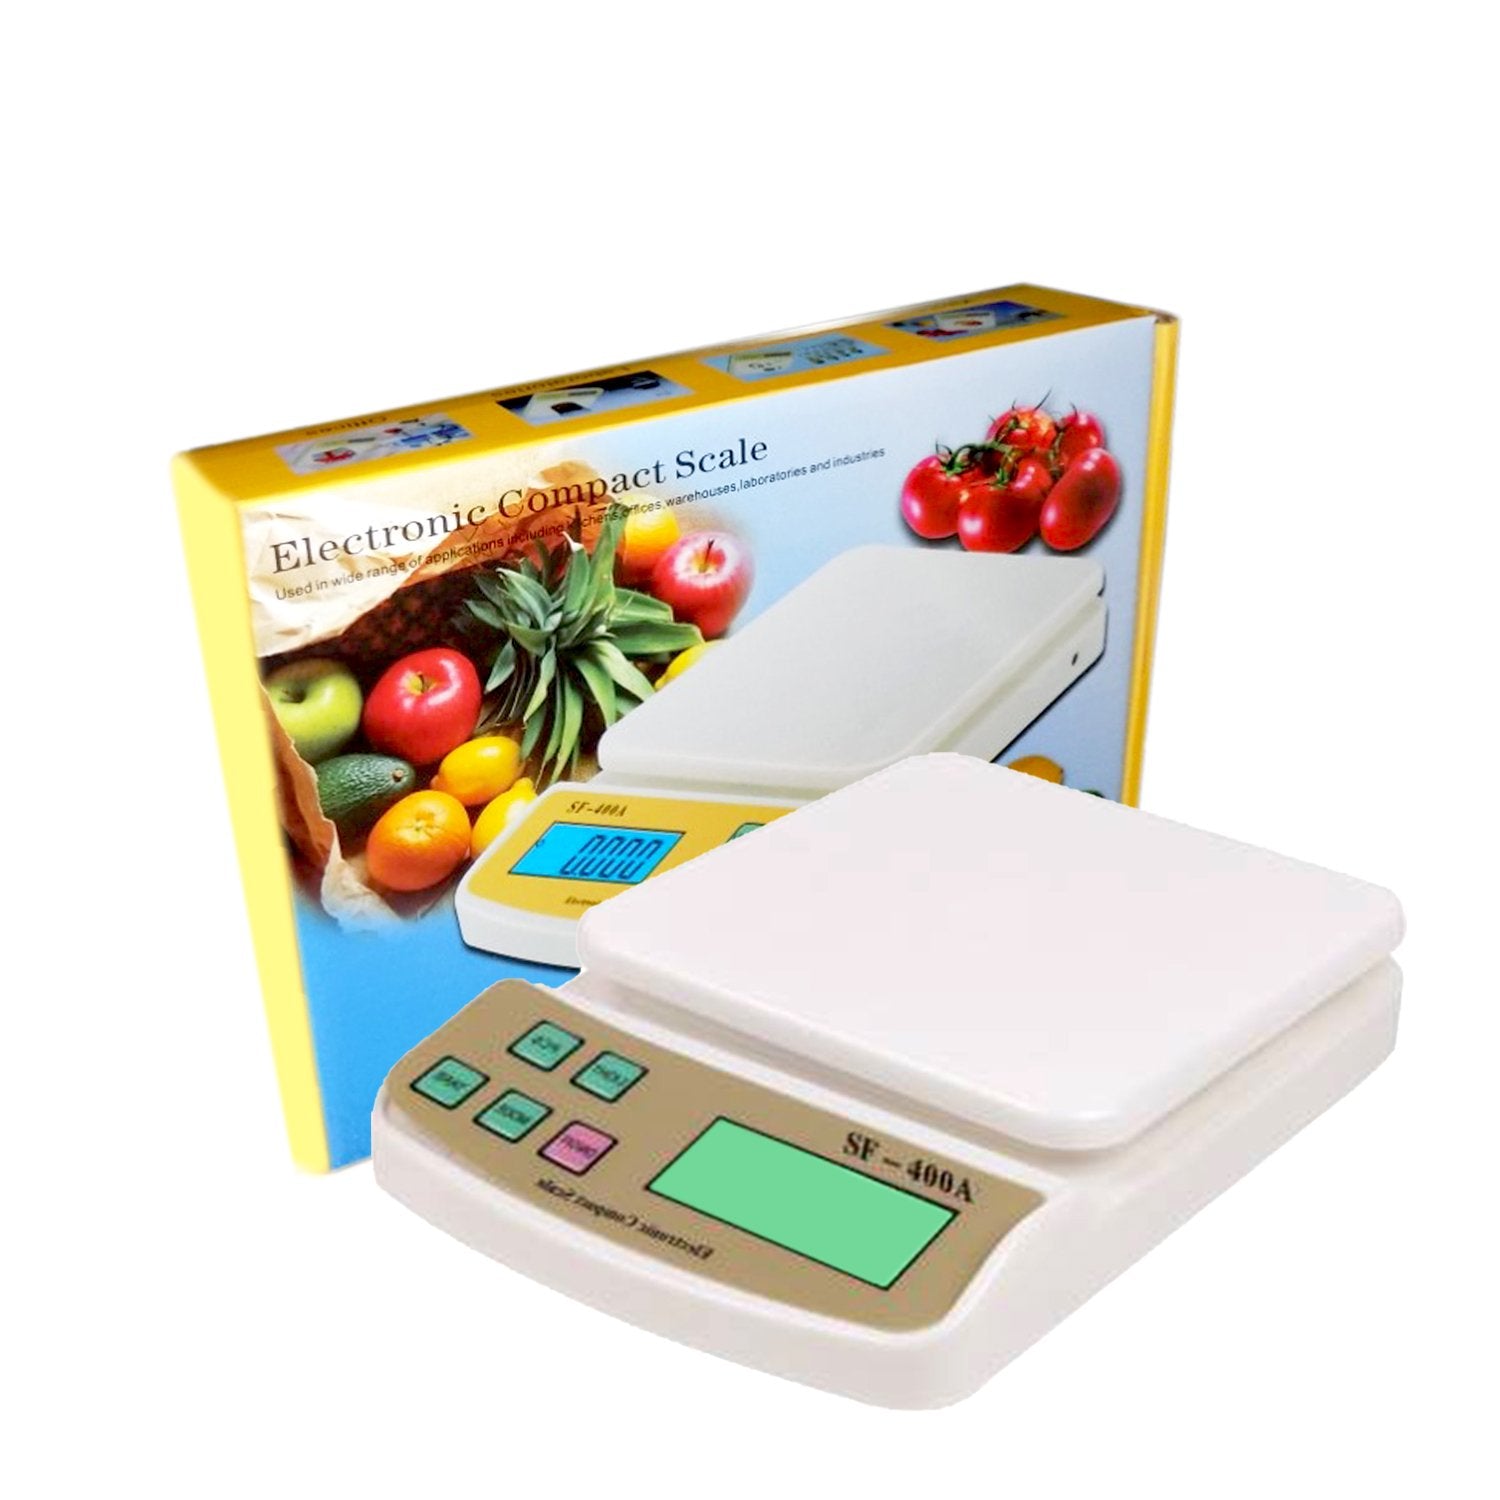 1610 Digital Multi-Purpose Kitchen Weighing Scale (SF400A) - SkyShopy